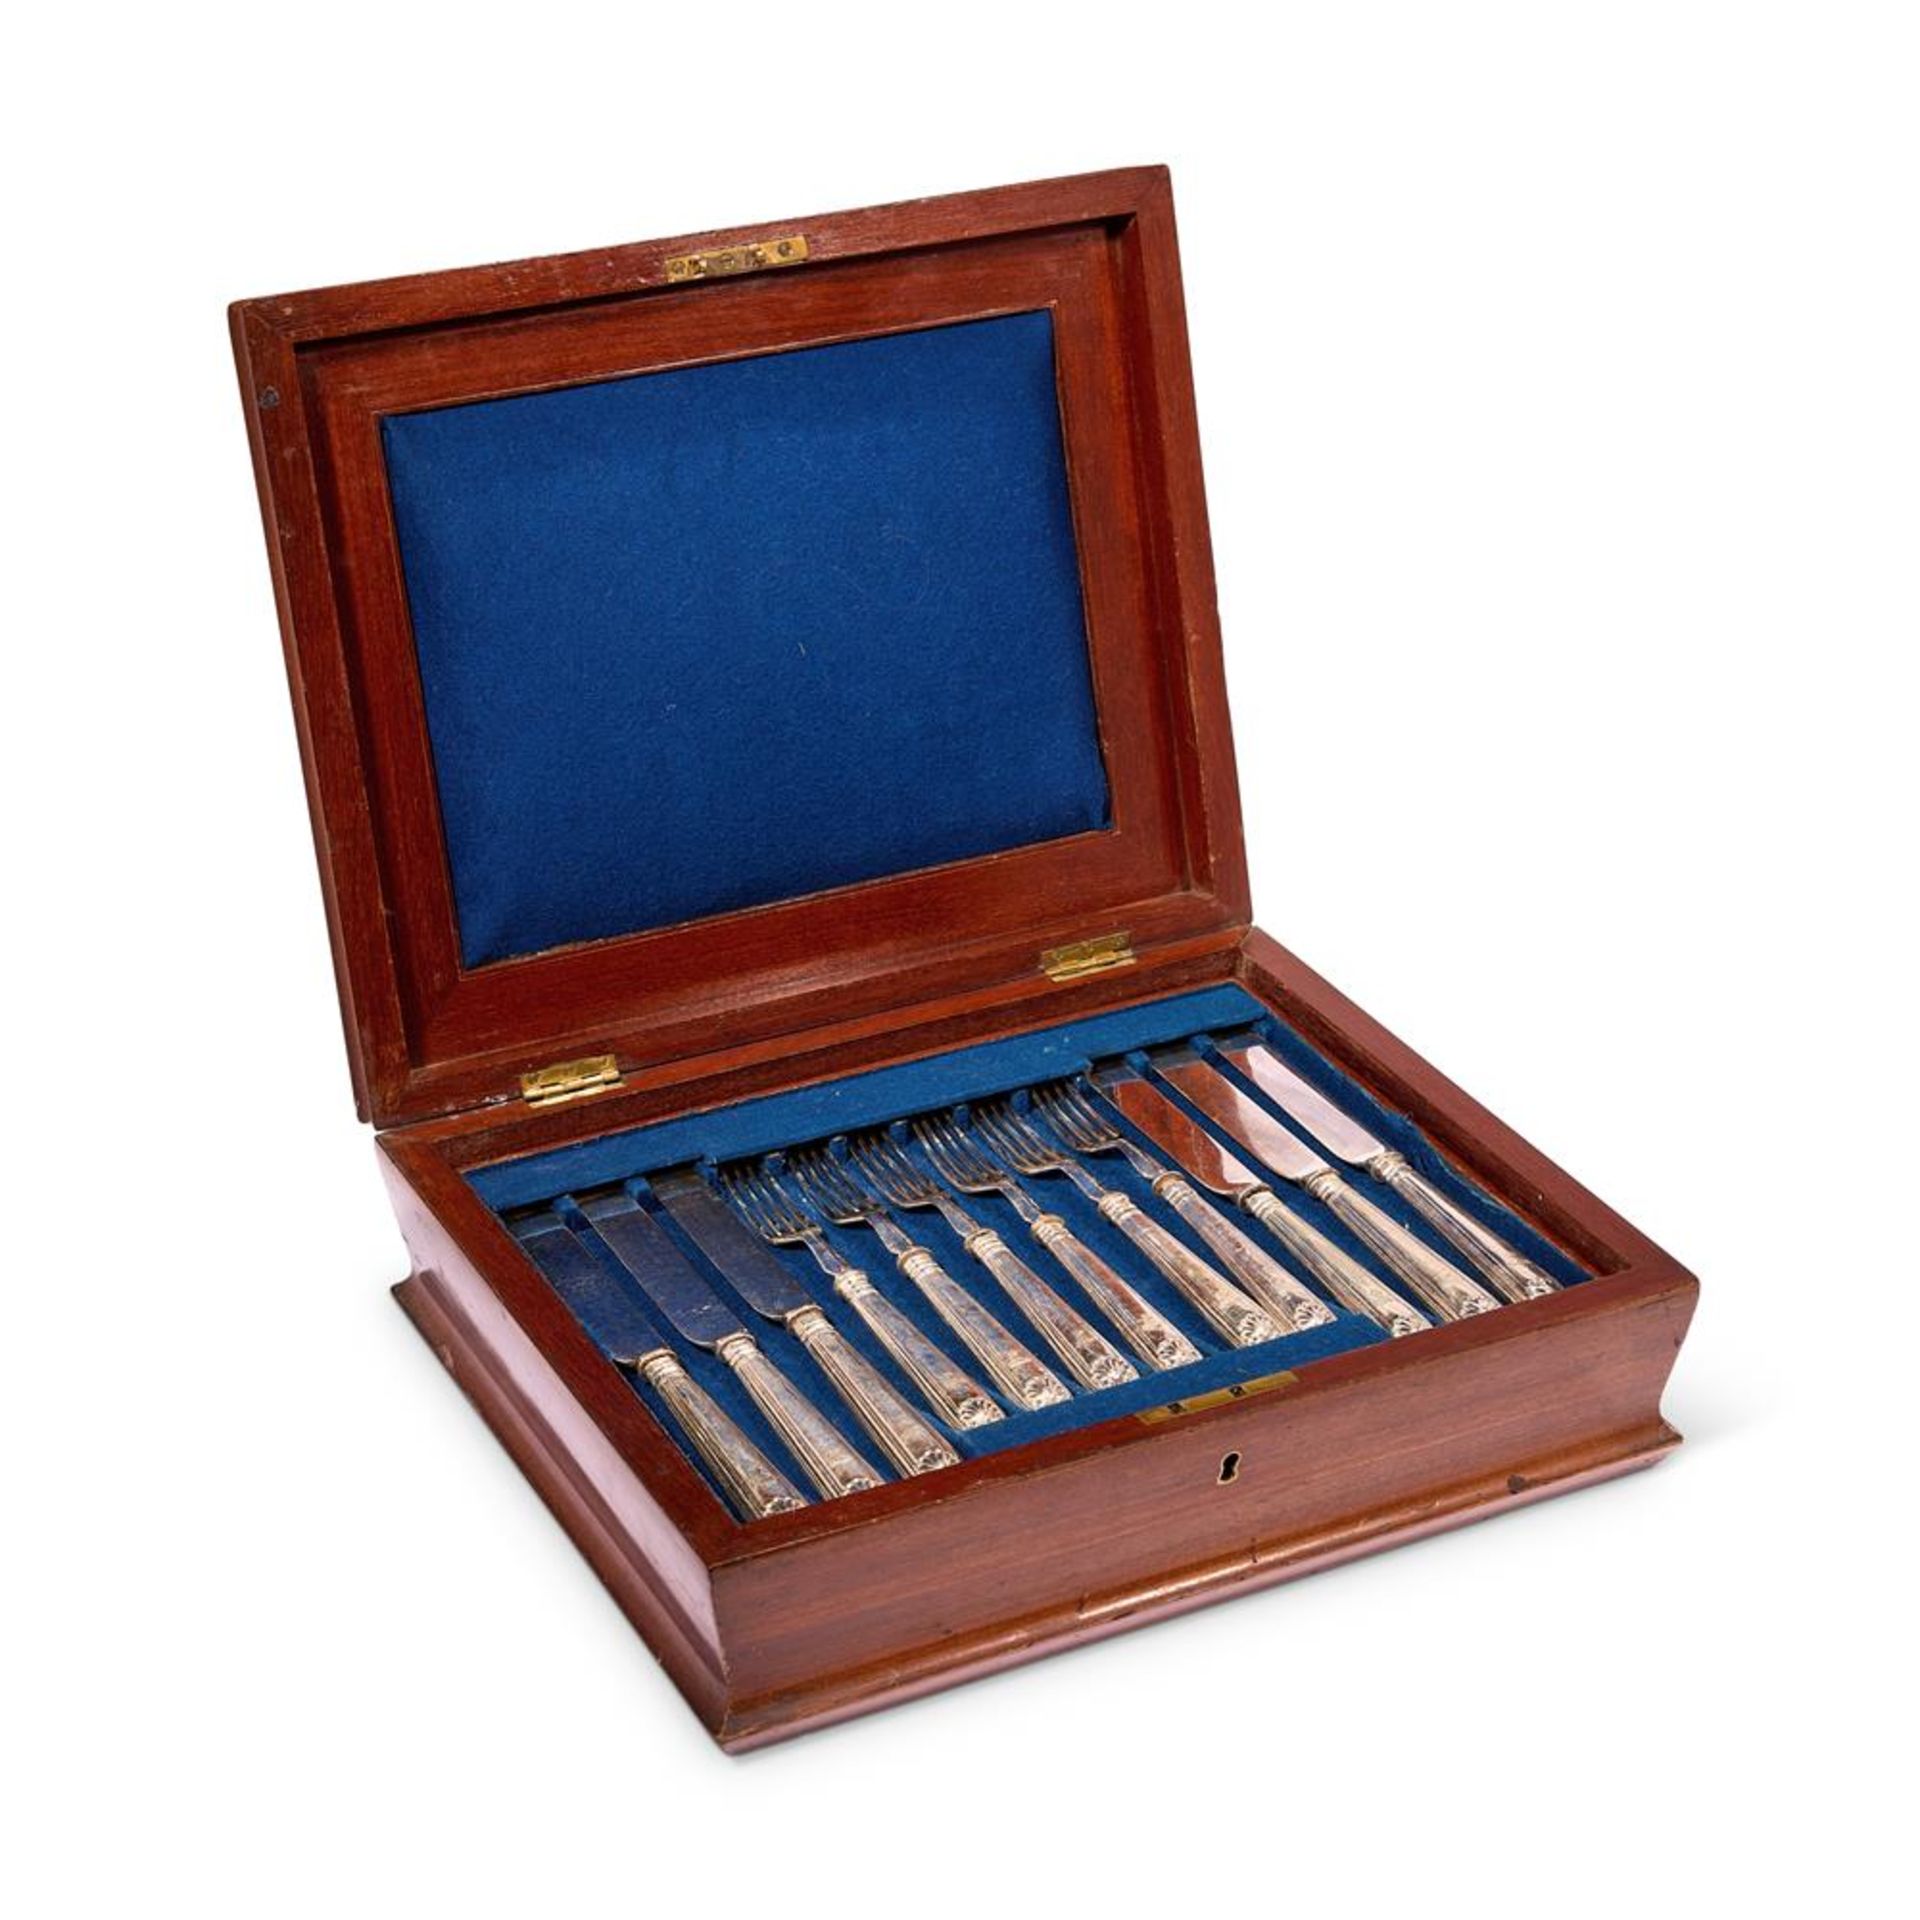 A CASED SET OF TWELVE ELECTRO-PLATED TEA KNIVES AND FORKS CIRCA 1900